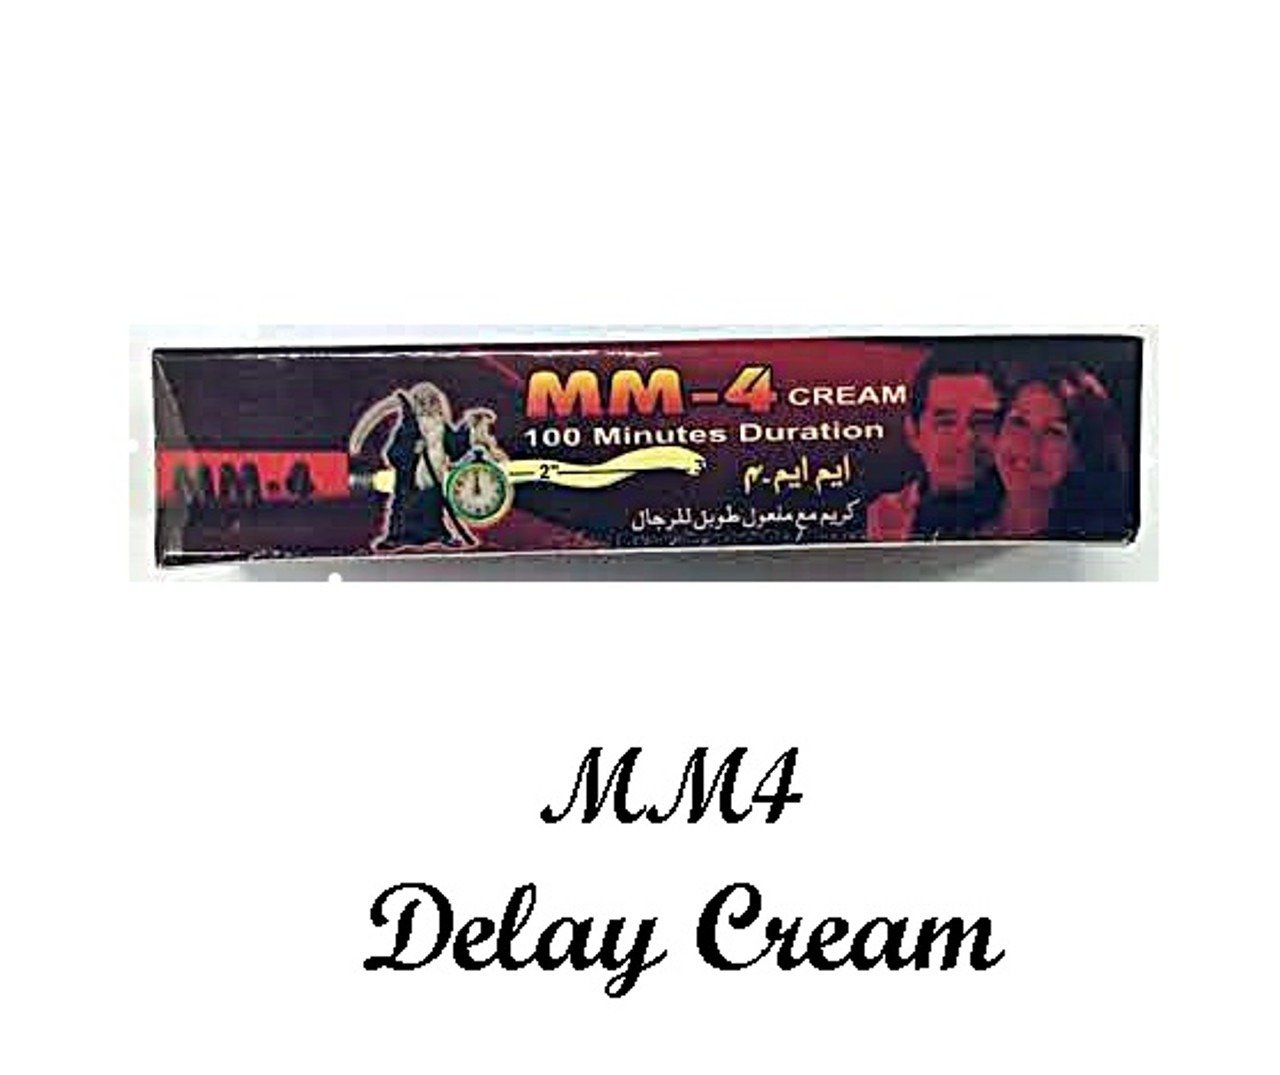 Buy Mm4 Long Timing Delay Cream Price In Pakistan at Rs. 1800 from Likeshop.pk